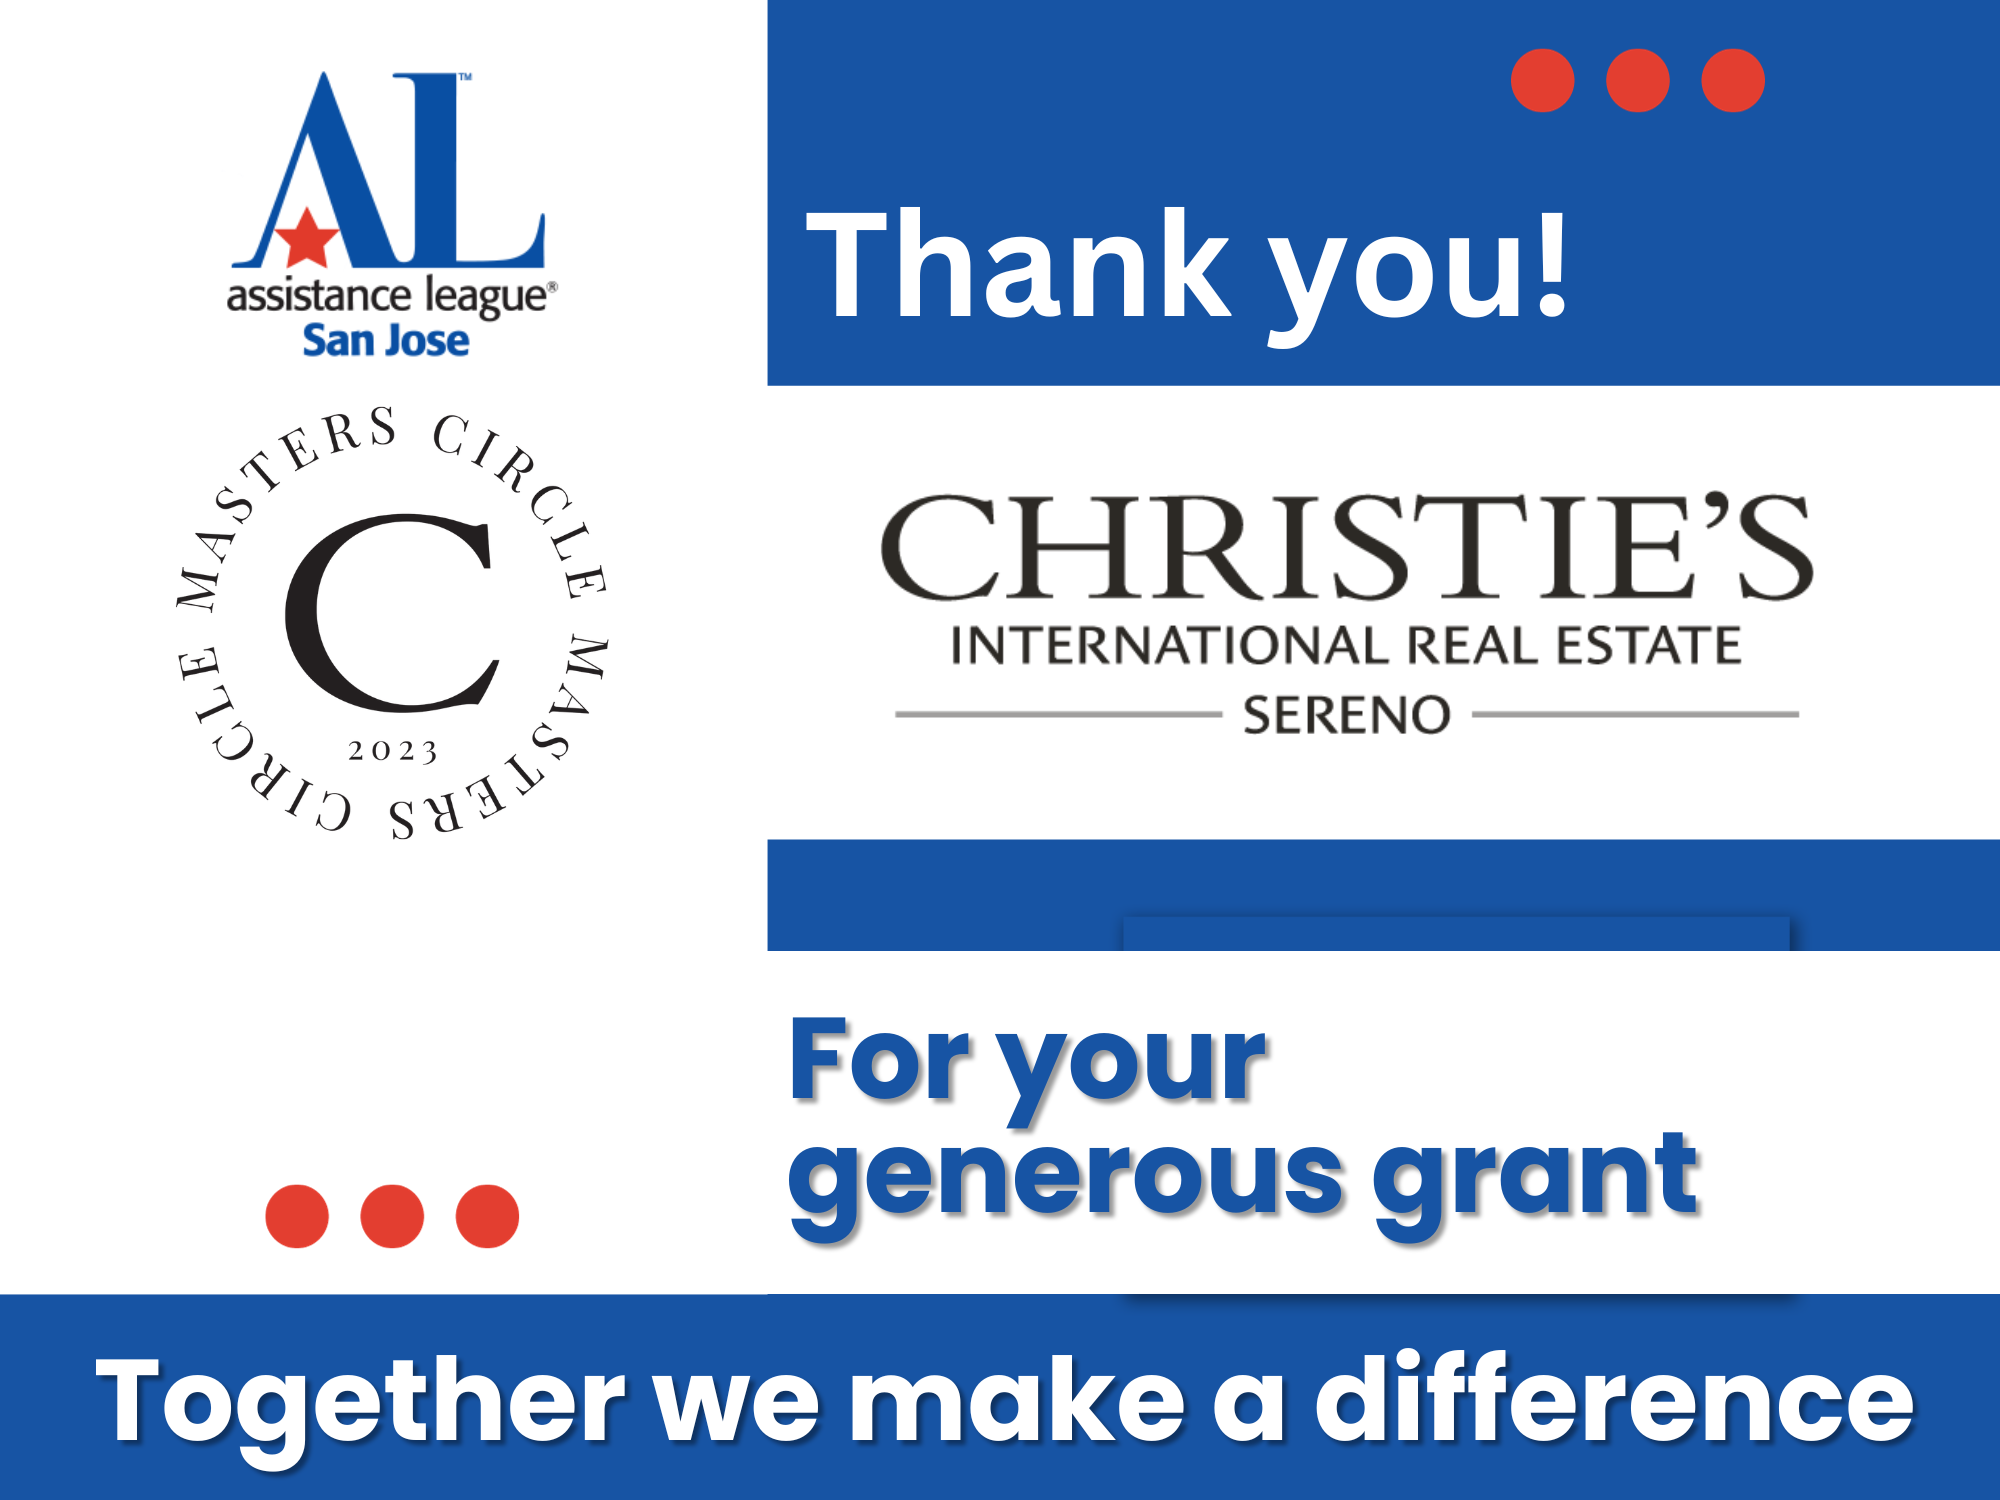 Thank you, Christies International Real Estate Sereno for your generous support. Together we make a difference.